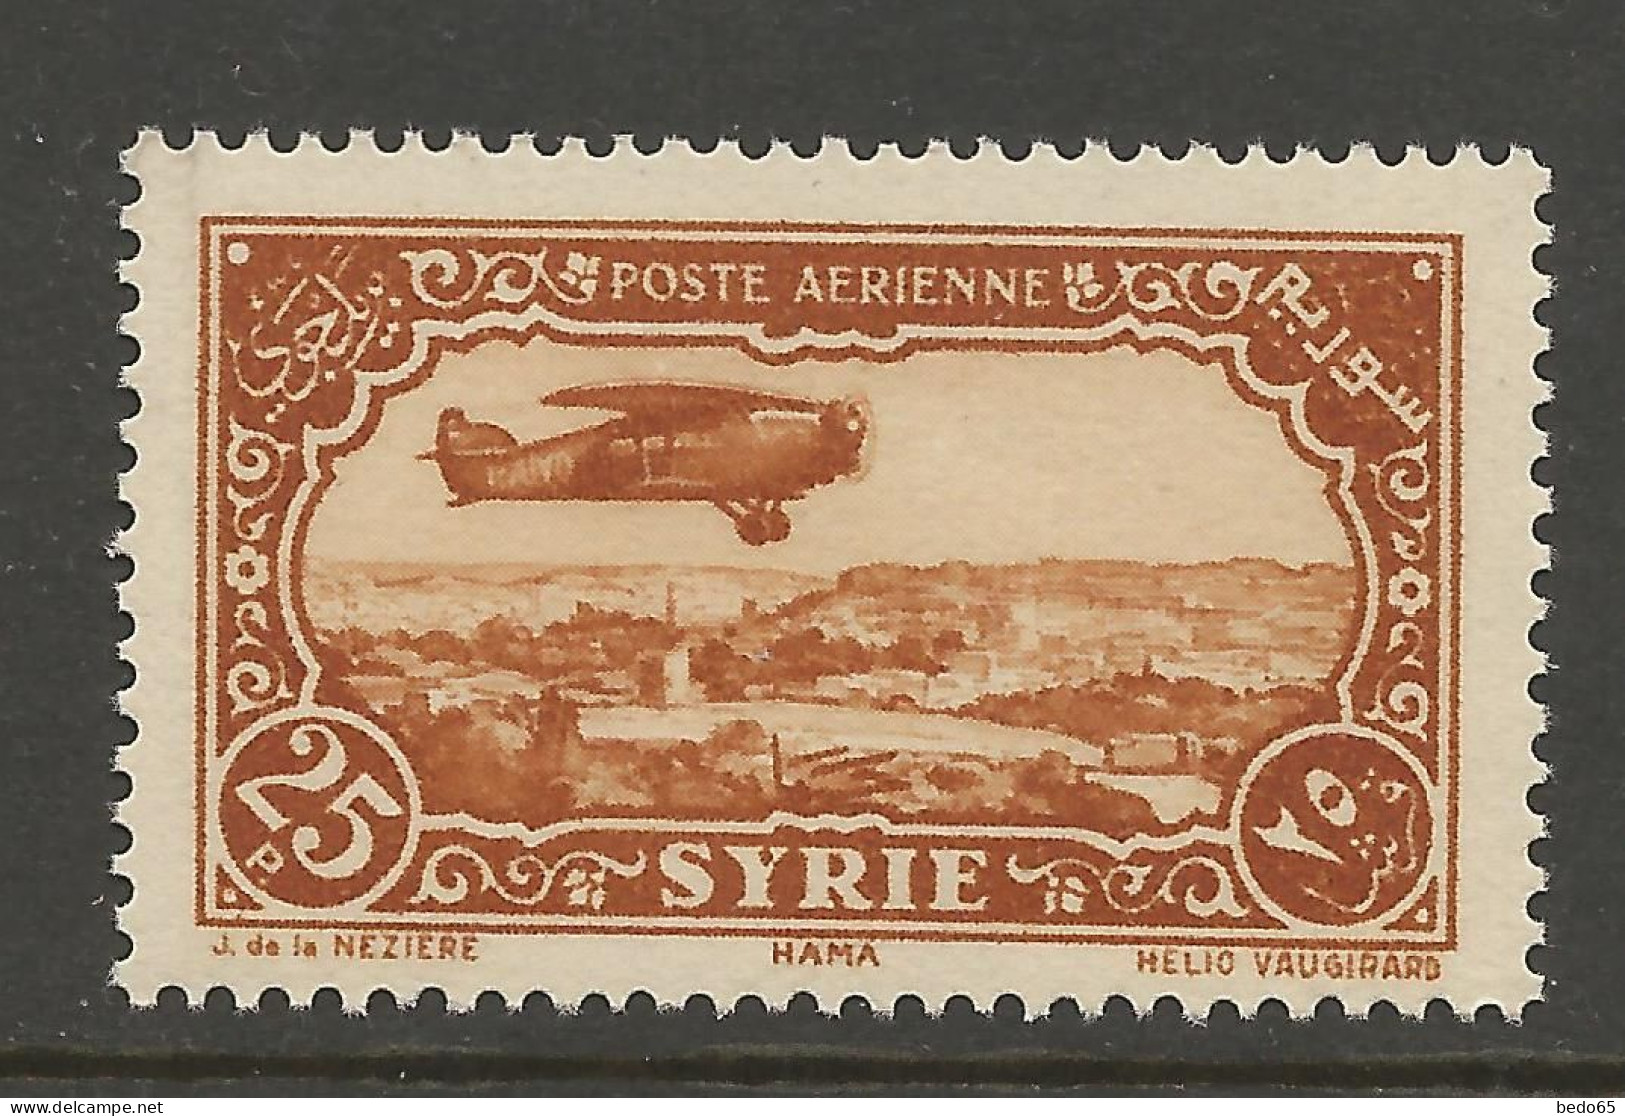 SYRIE PA N° 57 NEUF** LUXE SANS CHARNIERE NI TRACE / Hingeless / MNH - Posta Aerea